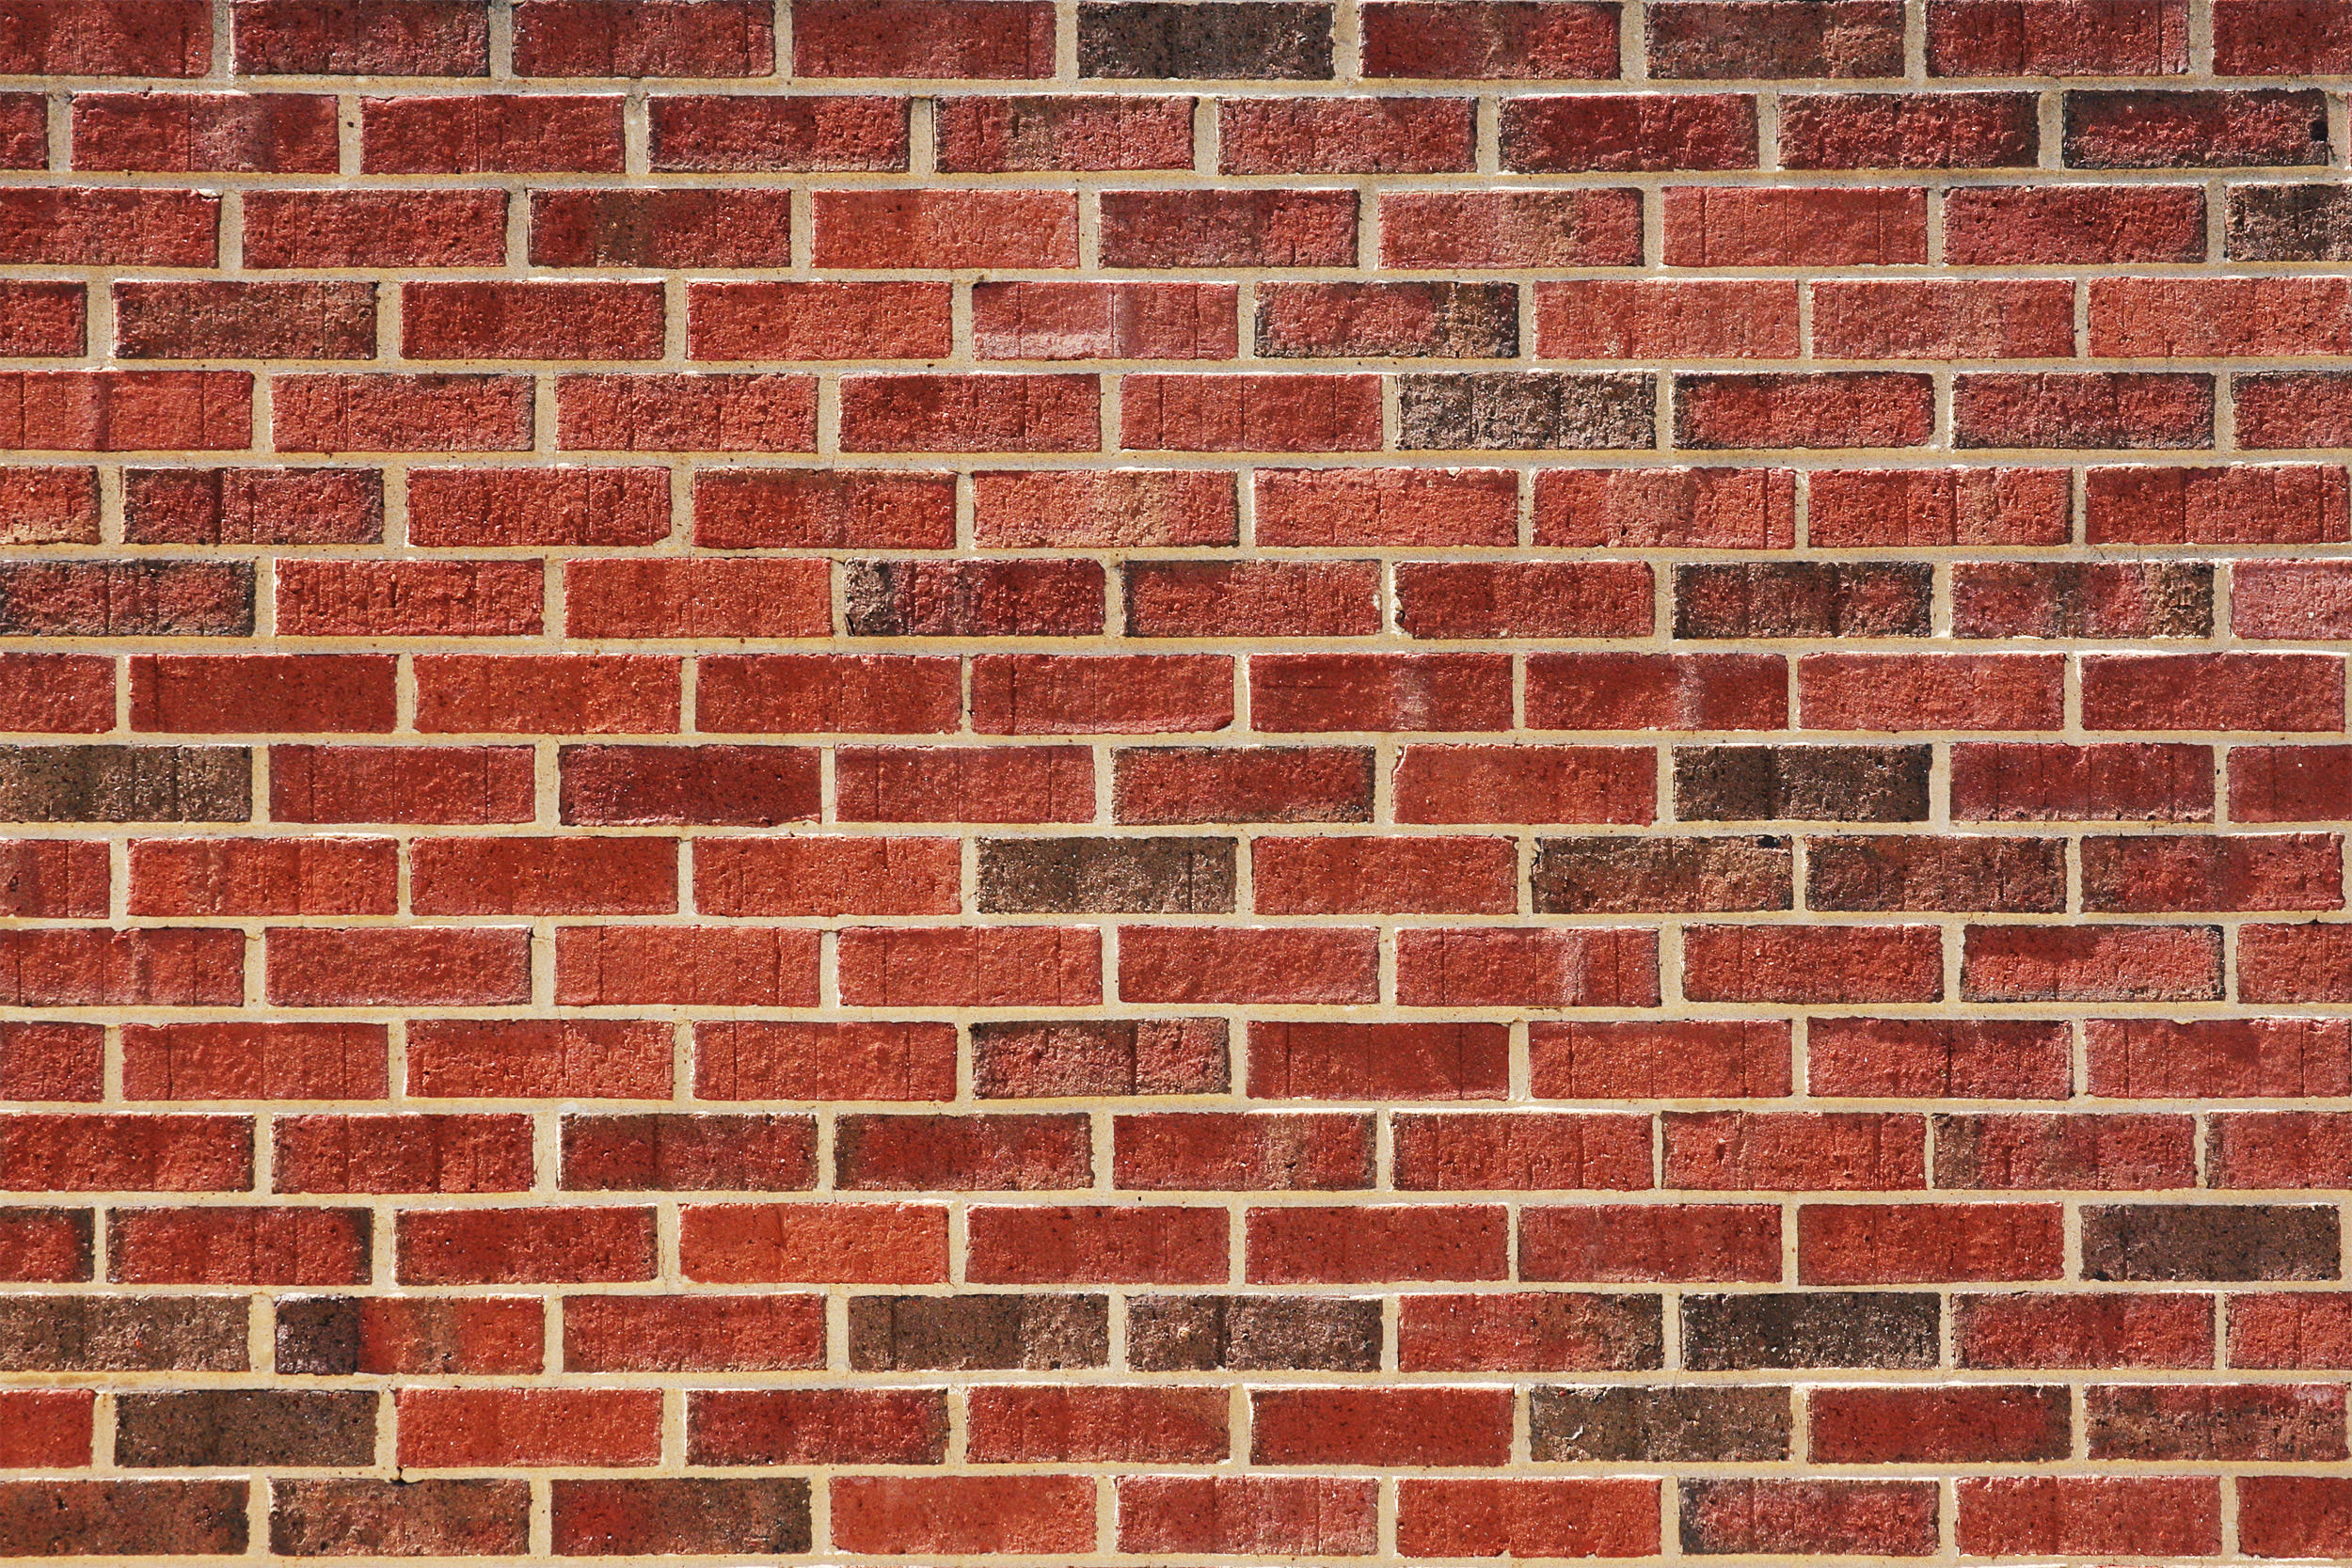 35-brick-wall-backgrounds-images-pictures-freecreatives